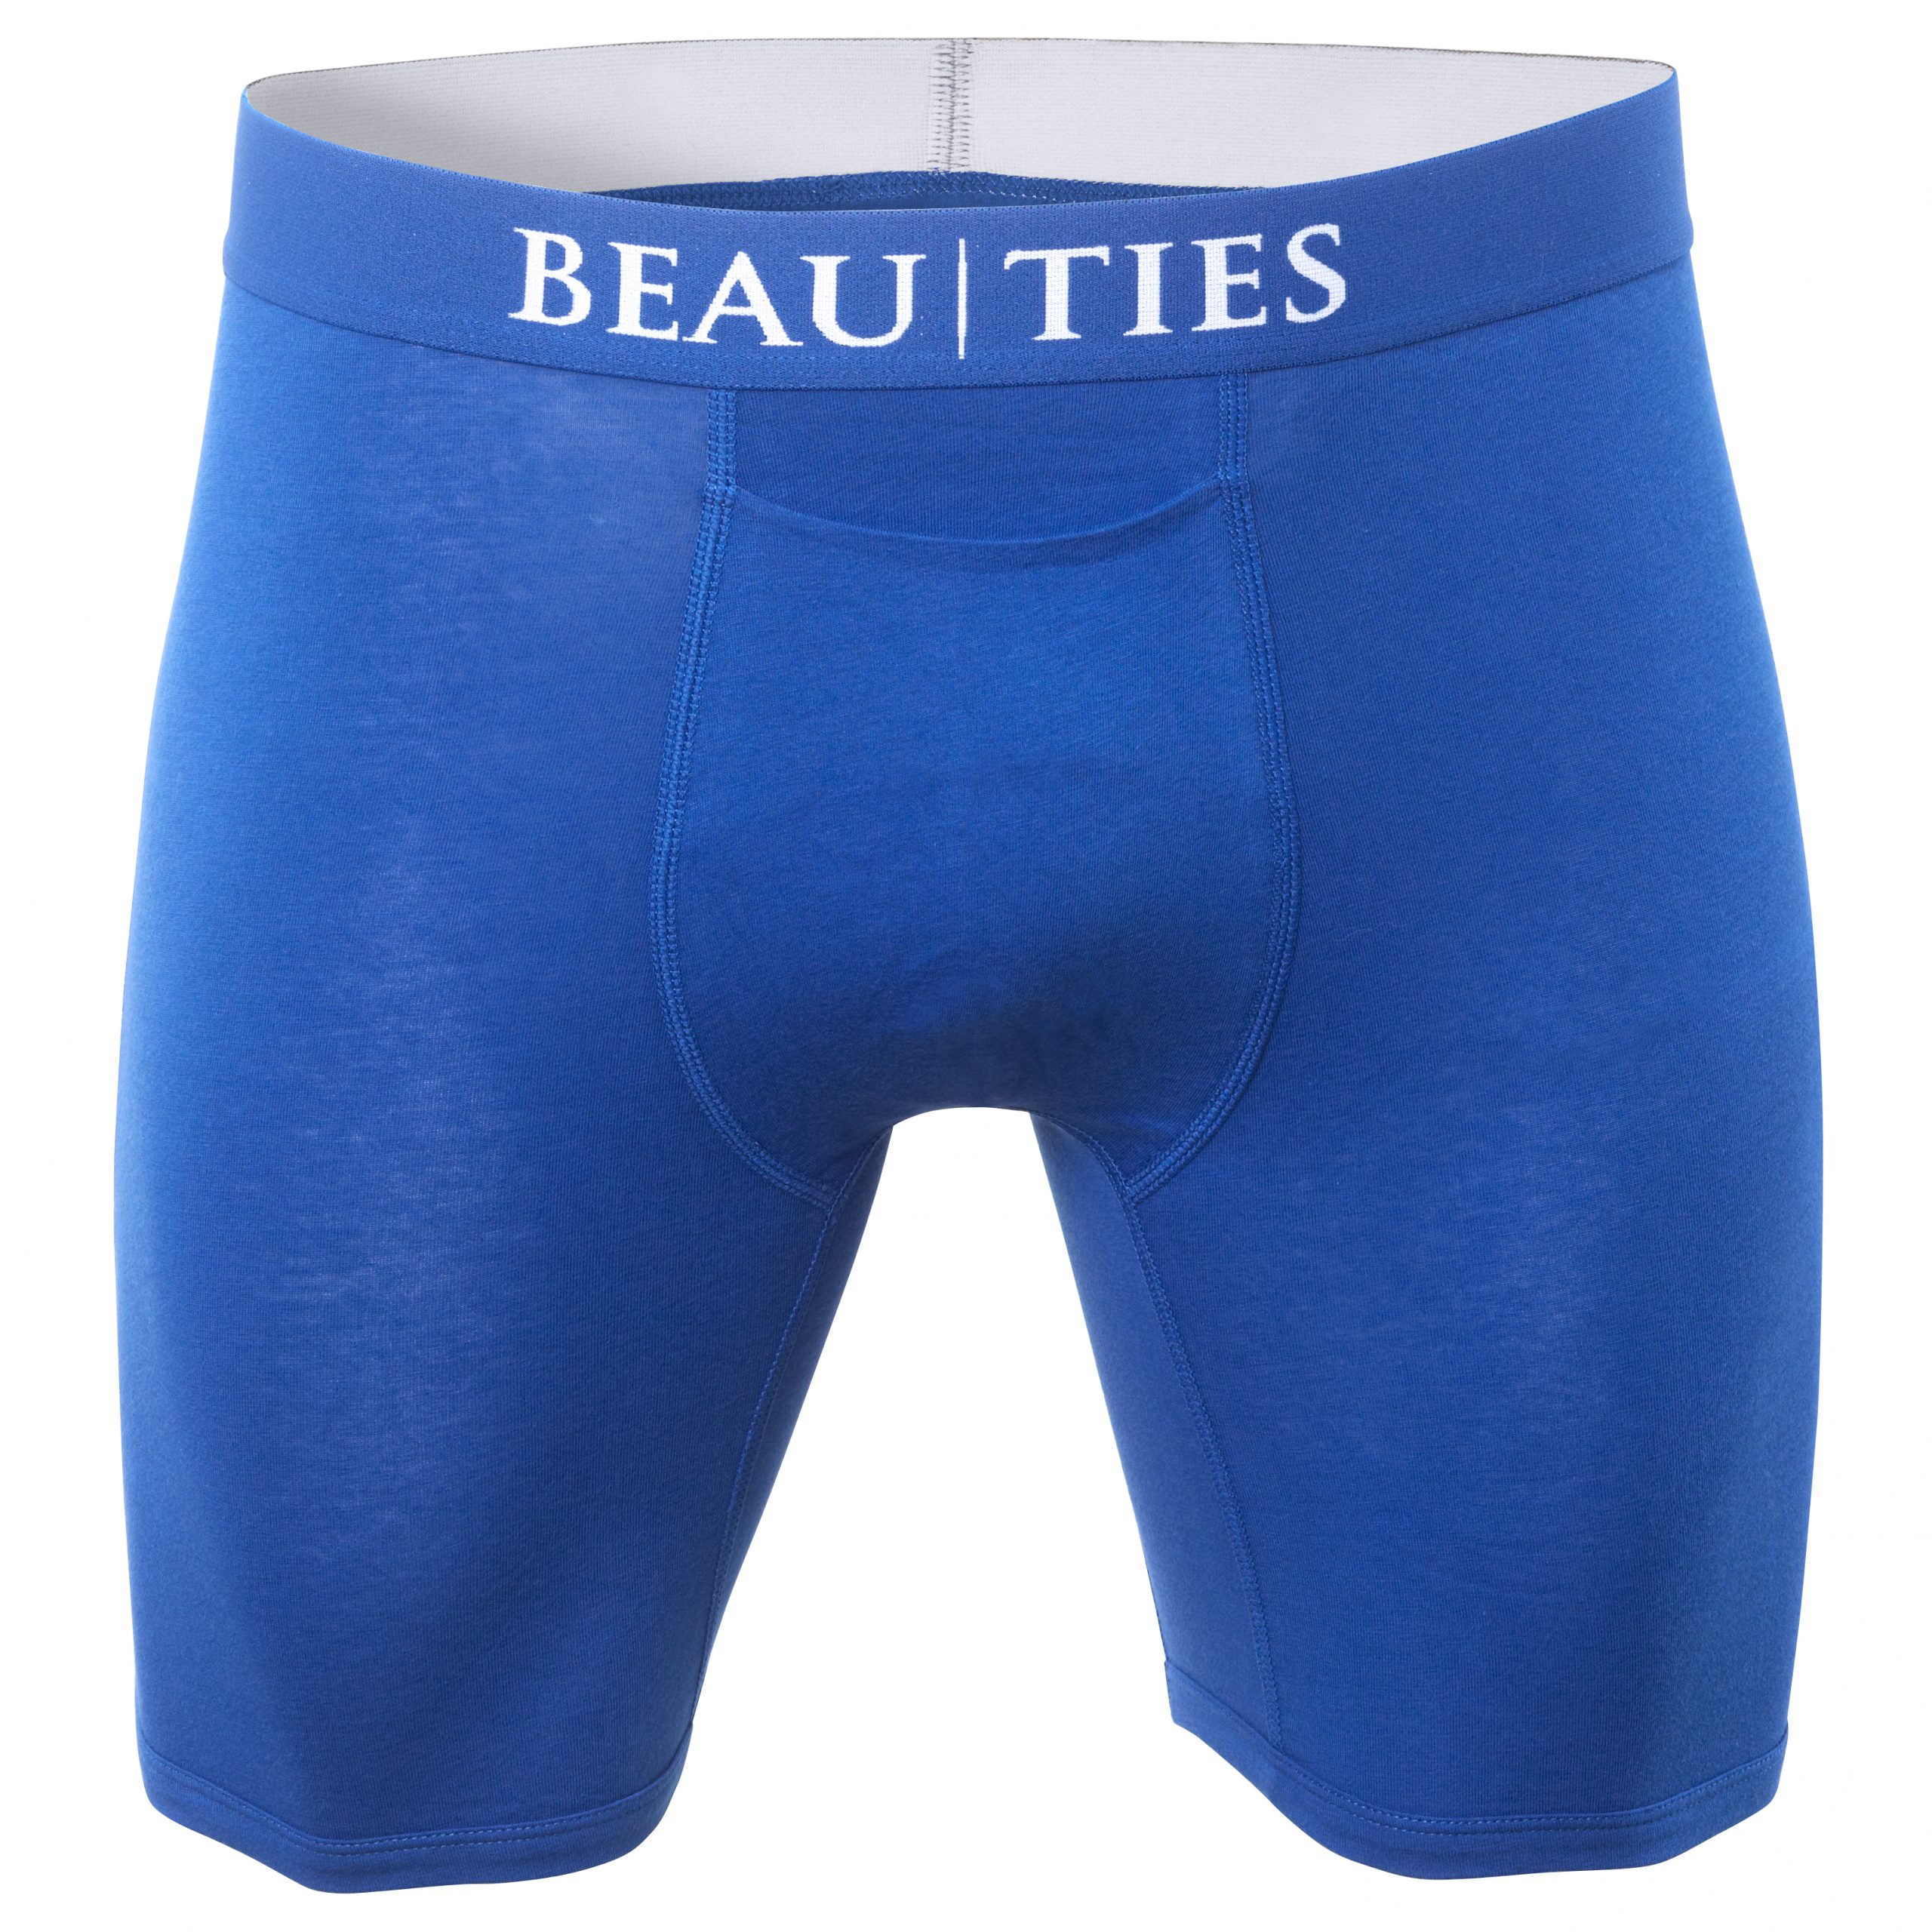 Branching out from Boxers to Boxer Briefs? Beau Ties Might Be Your Best ...